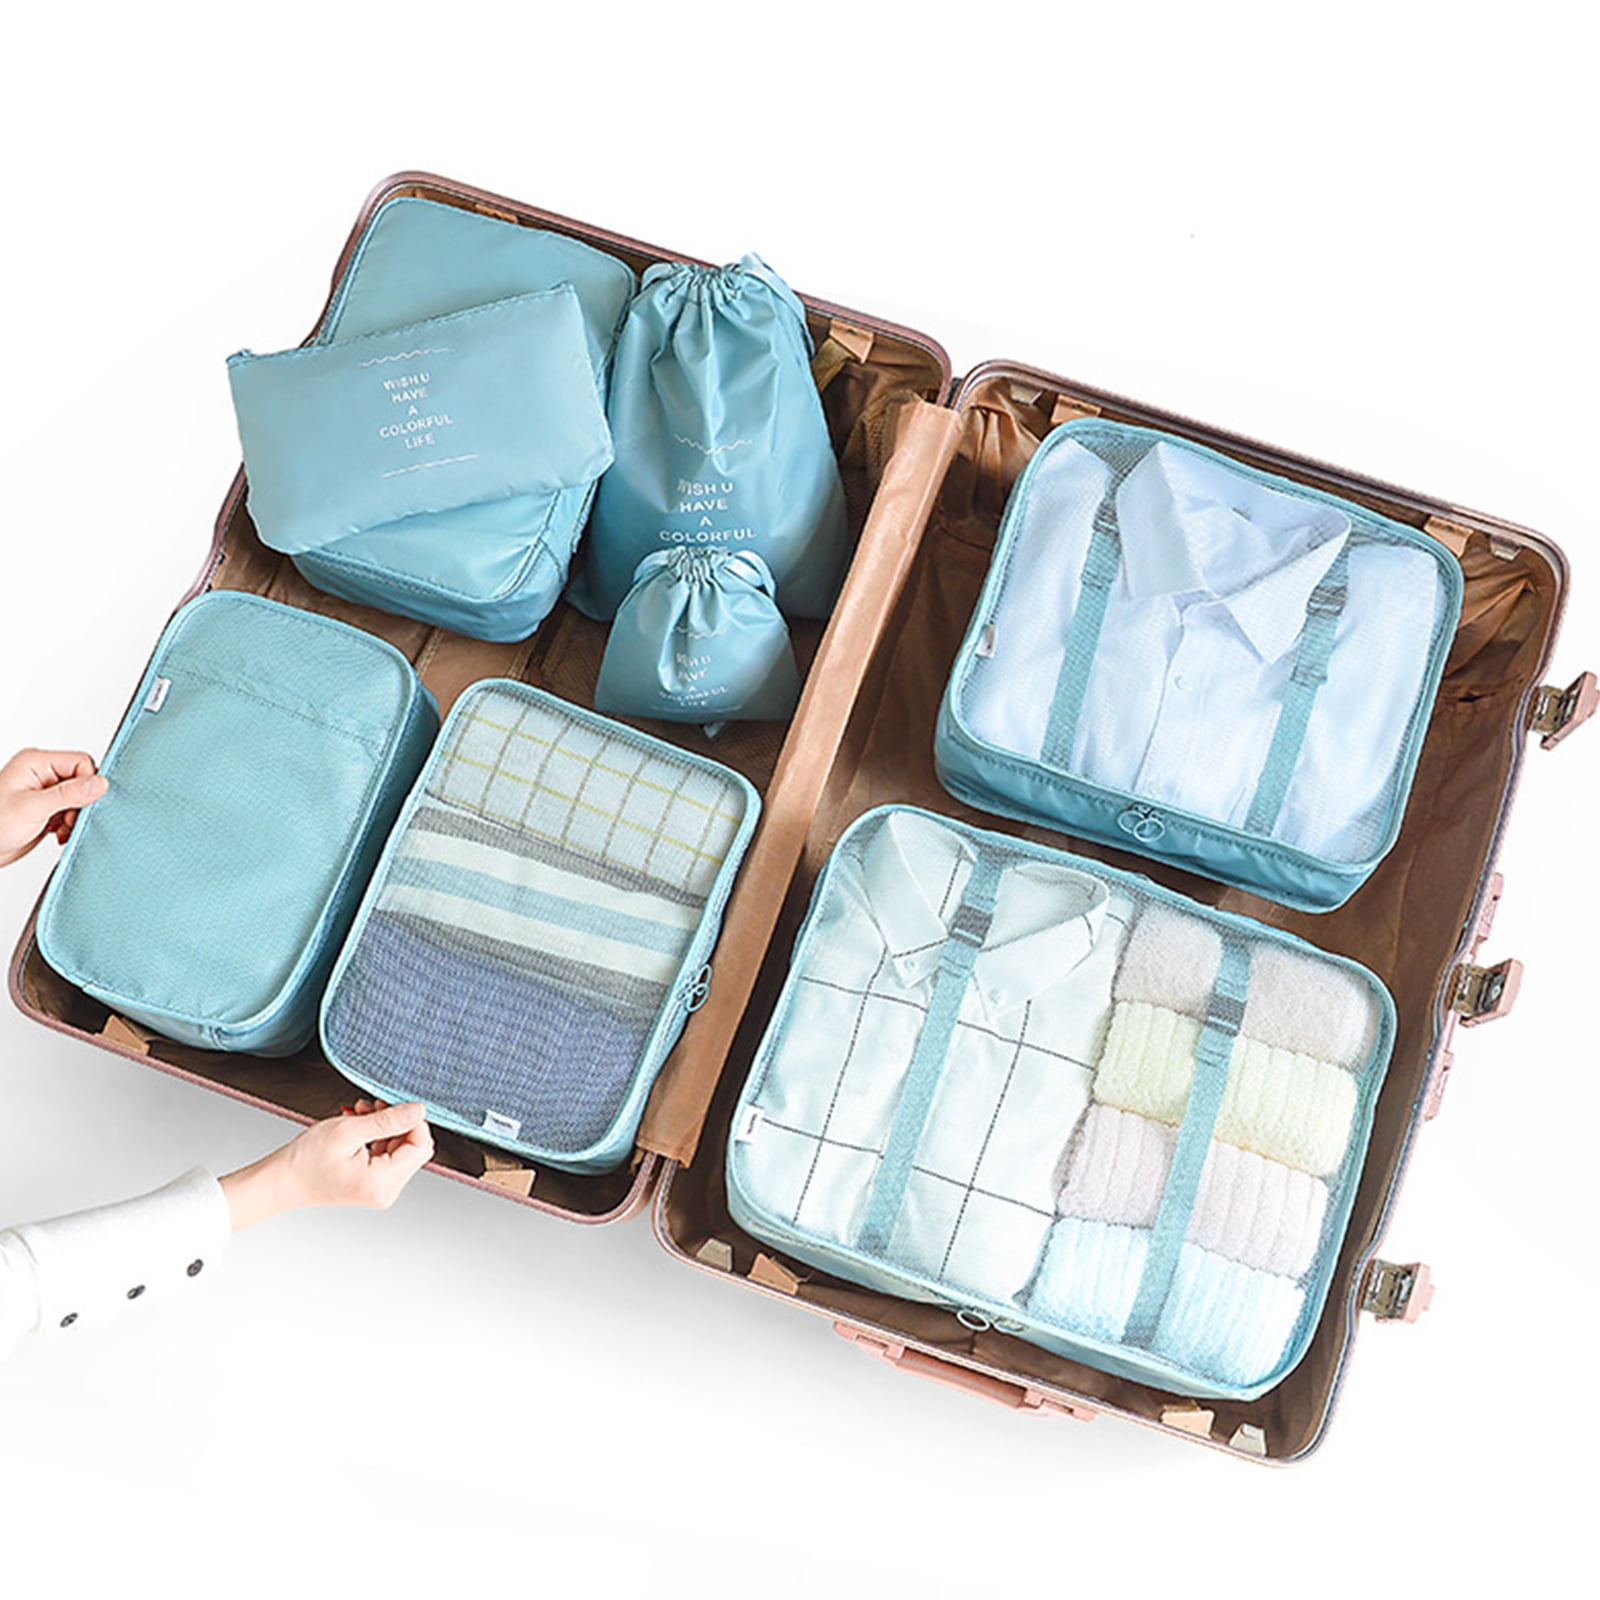 Béis The Compression Set of 6 Packing Cubes in Beige